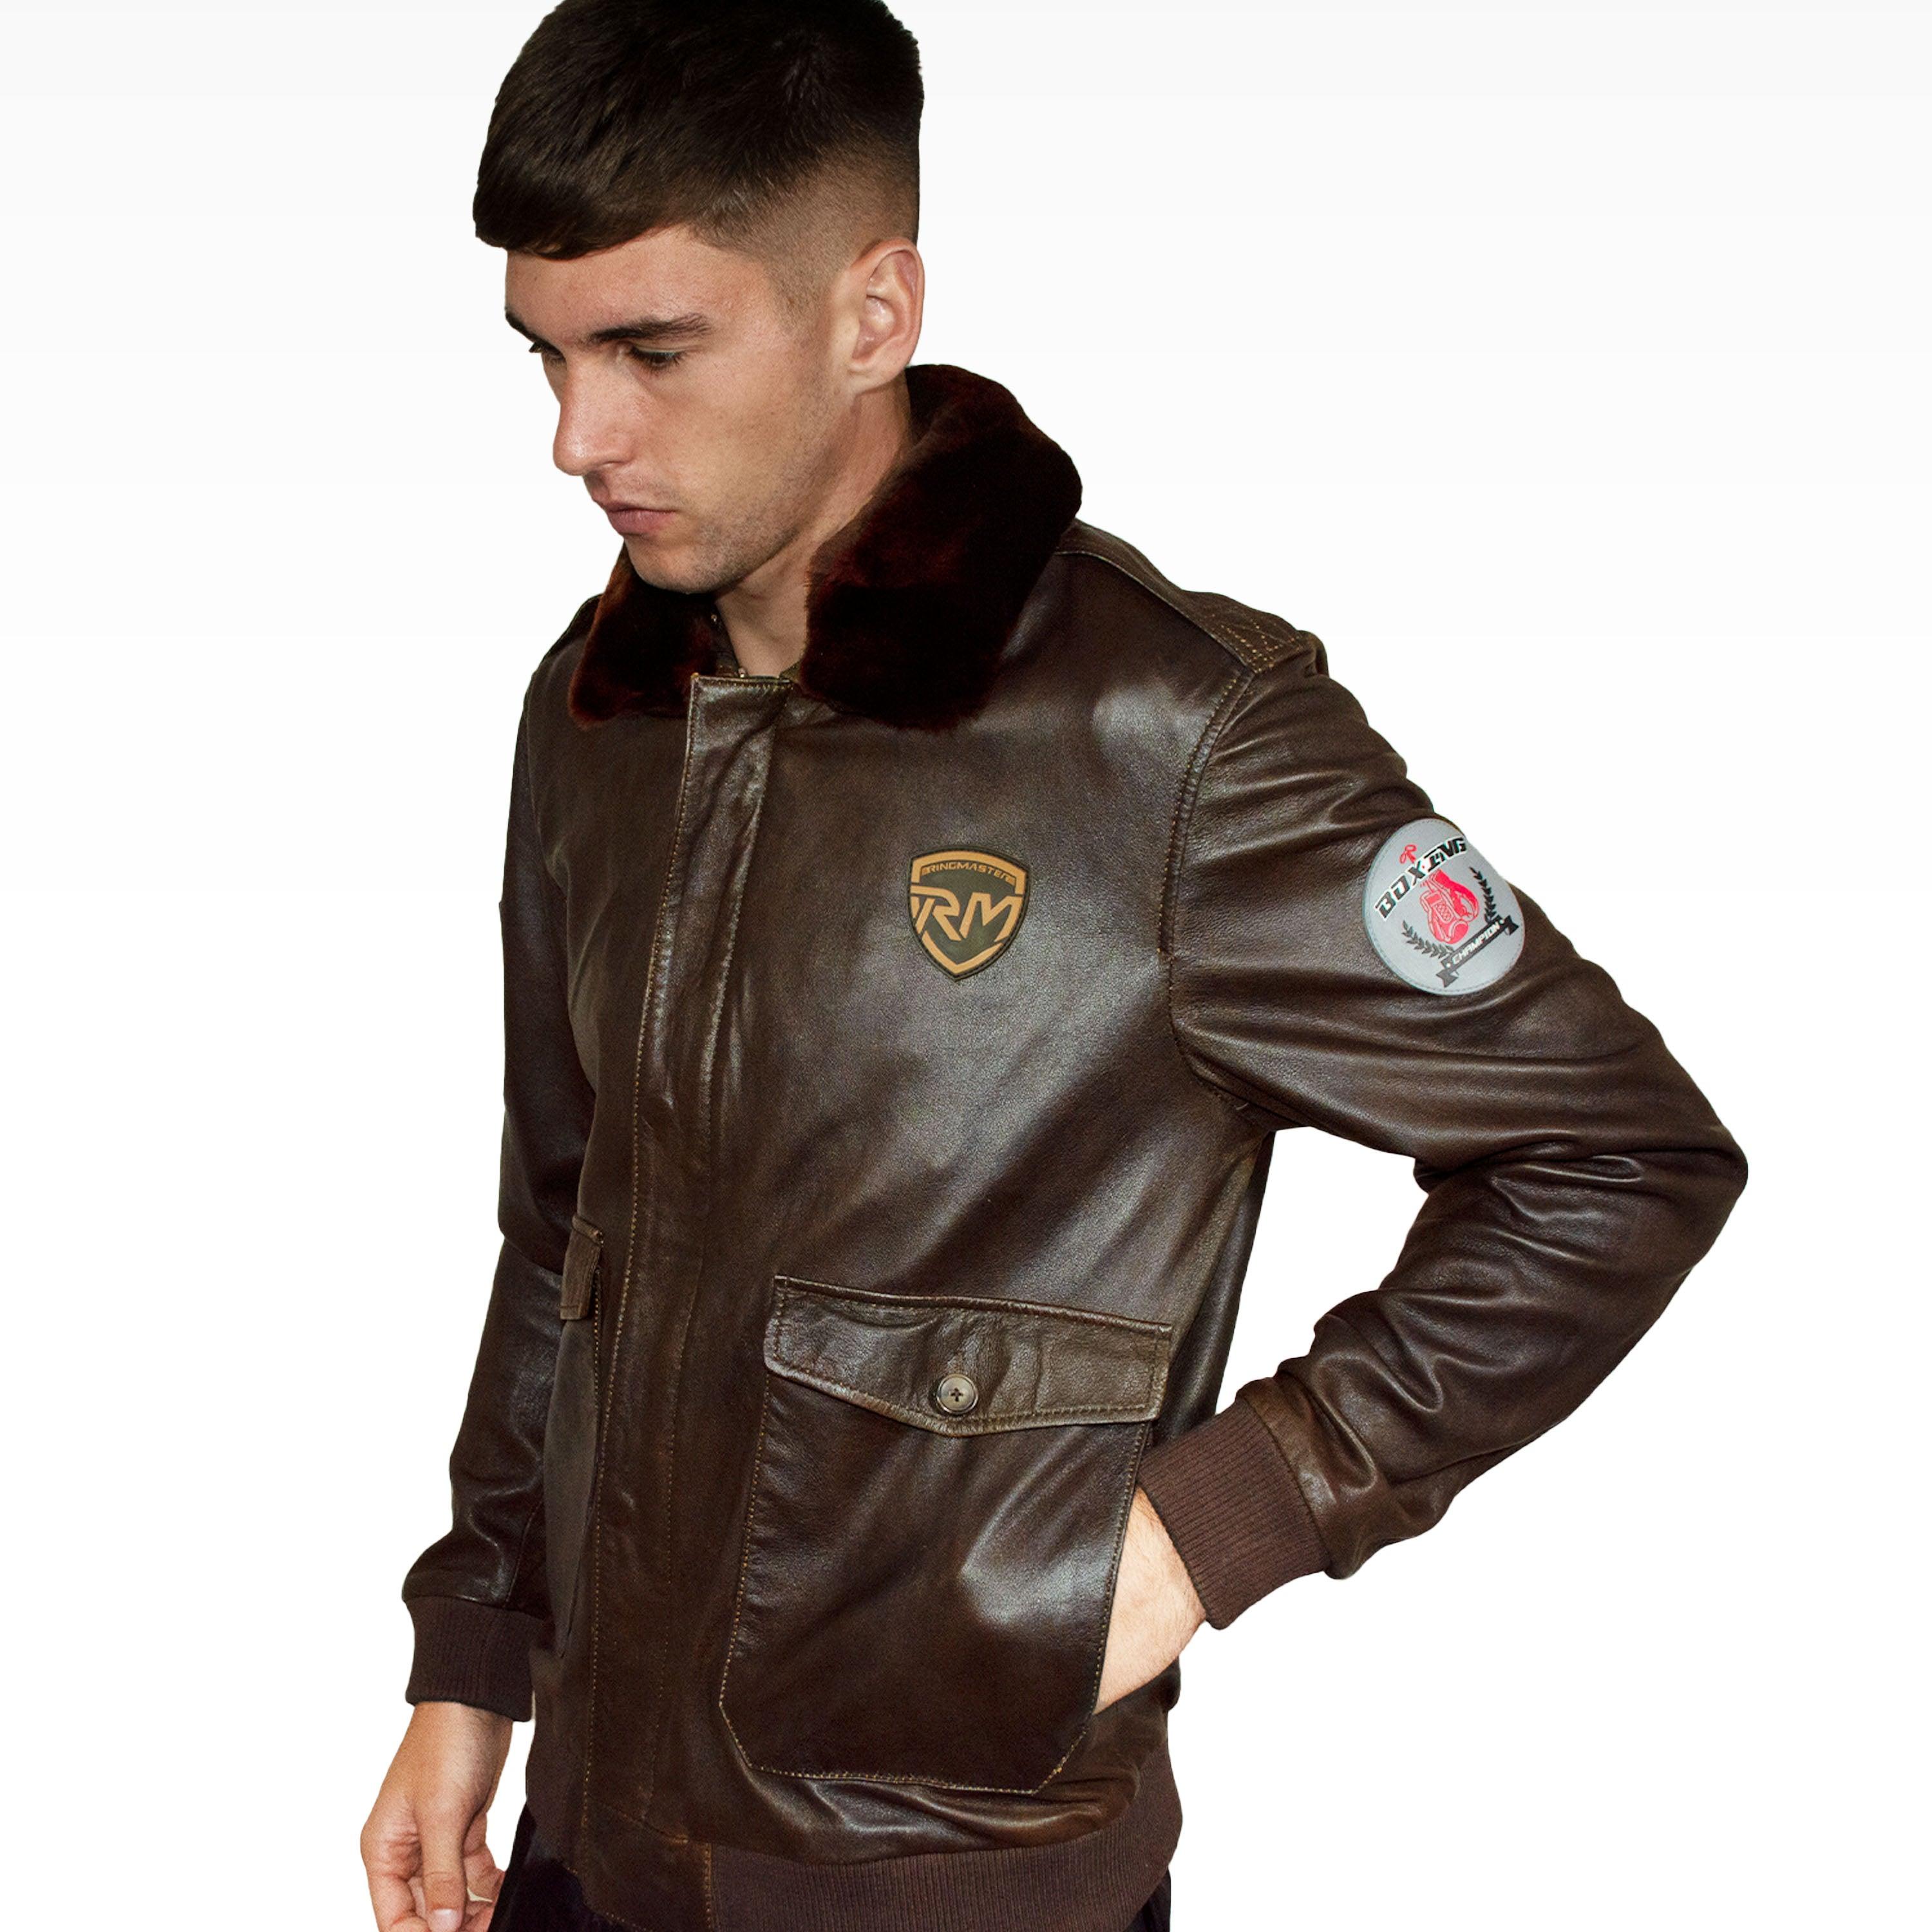 RingMaster Sports Pilot Leather Jacket L.G.N.D series Dark Brown - RINGMASTER SPORTS - Made For Champions